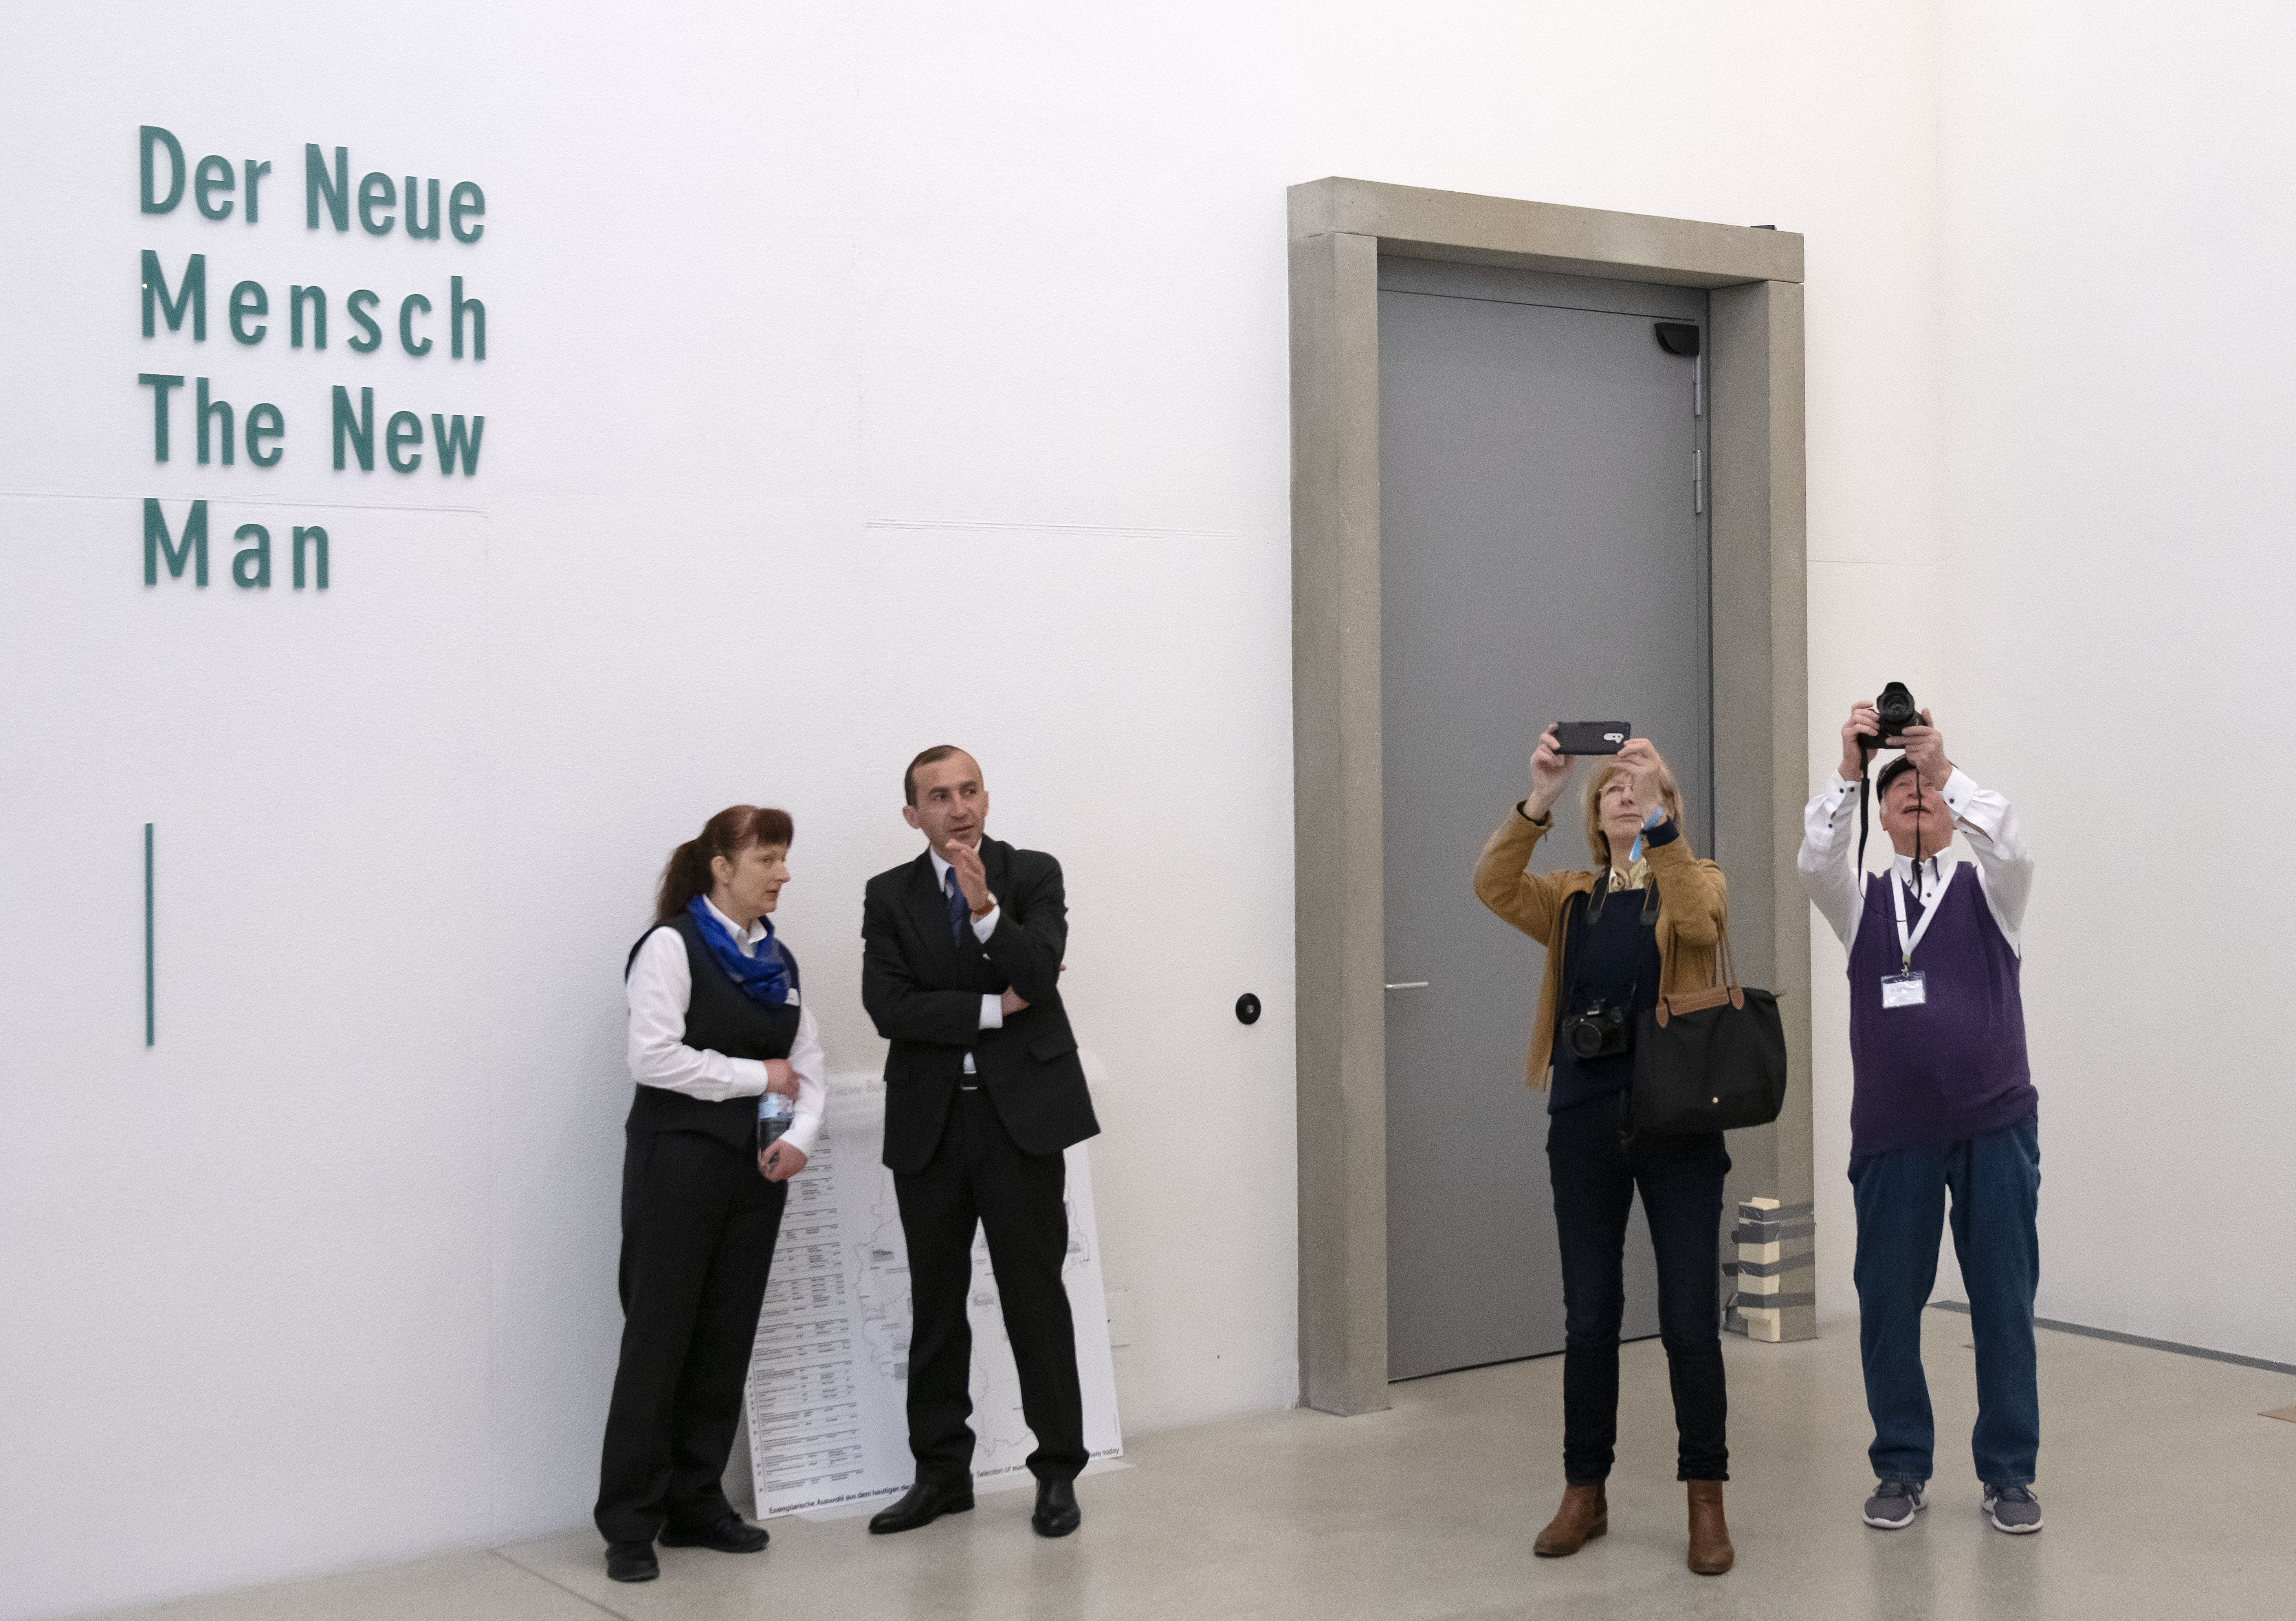 Visitors hold camera devices during the press preview prior to the opening of the new Bauhaus Museum of the 'Klassik Stiftung Weimar' (Classic Foundation Weimar) in Weimar, Germany, Thursday, April 4, 2019. The museum designed by Berlin-based architect Heike Hanada will focus on the early Bauhaus that was founded in Weimar in 1919 and stayed there until 1925. The official opening of the new Bauhaus Museums will take place on Friday, April 5, 2019. (AP Photo/Jens Meyer)